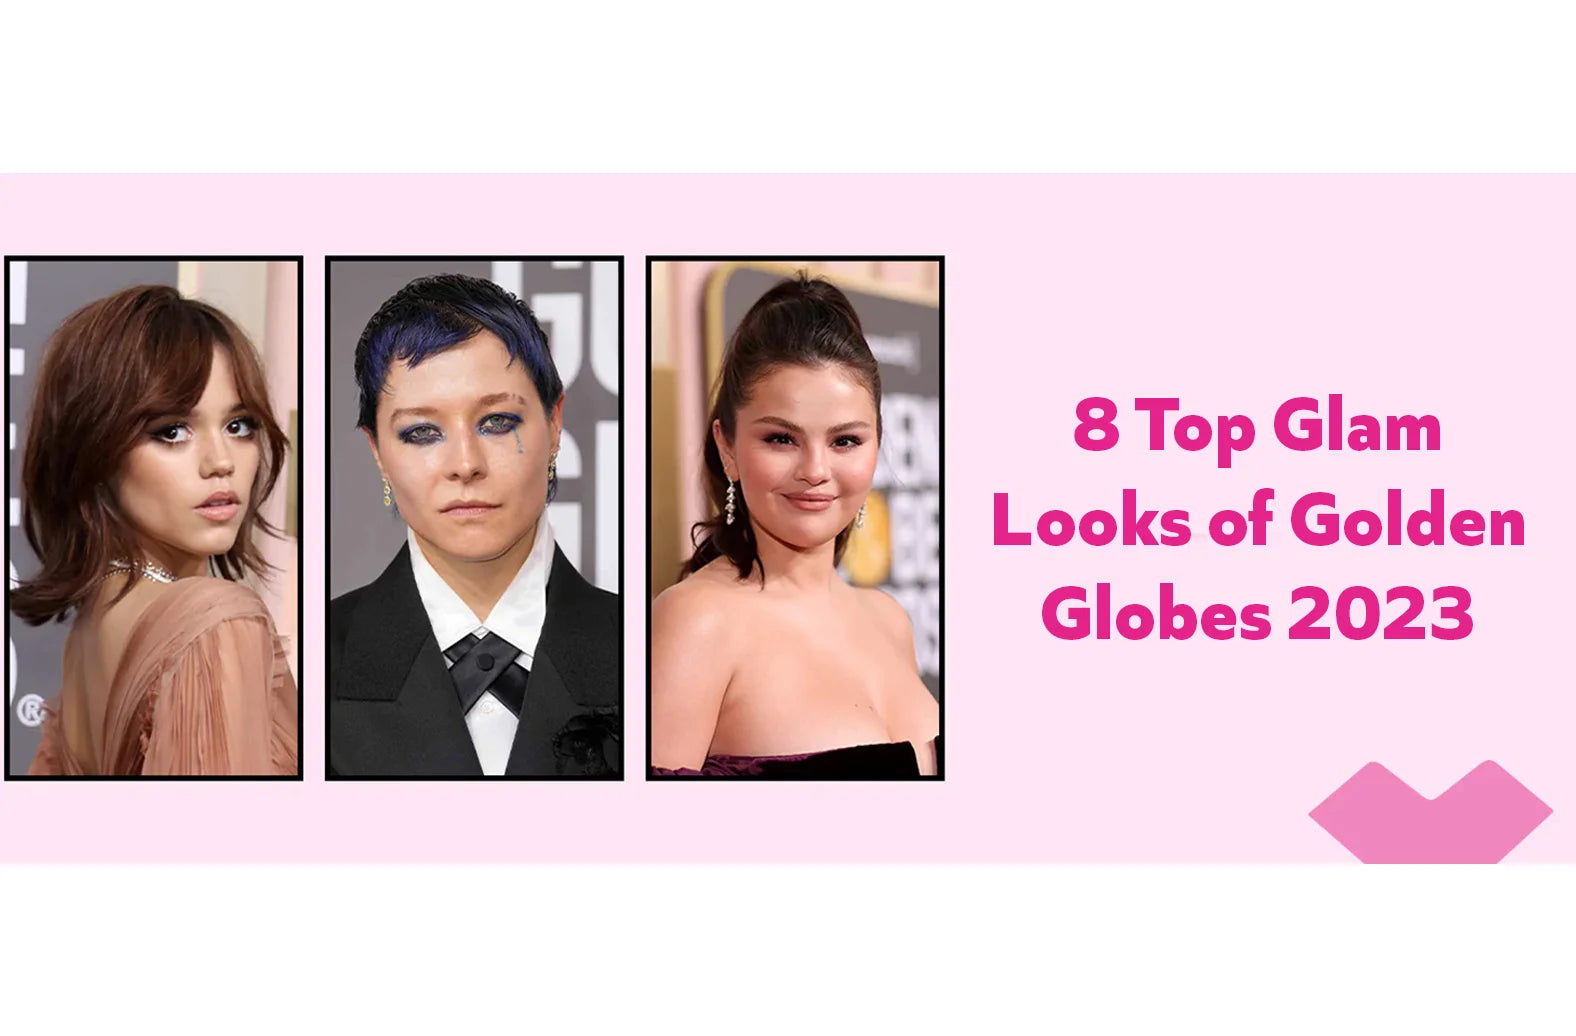 8-TOP-GLAM-LOOKS-OF-GOLDEN-GLOBES-2023